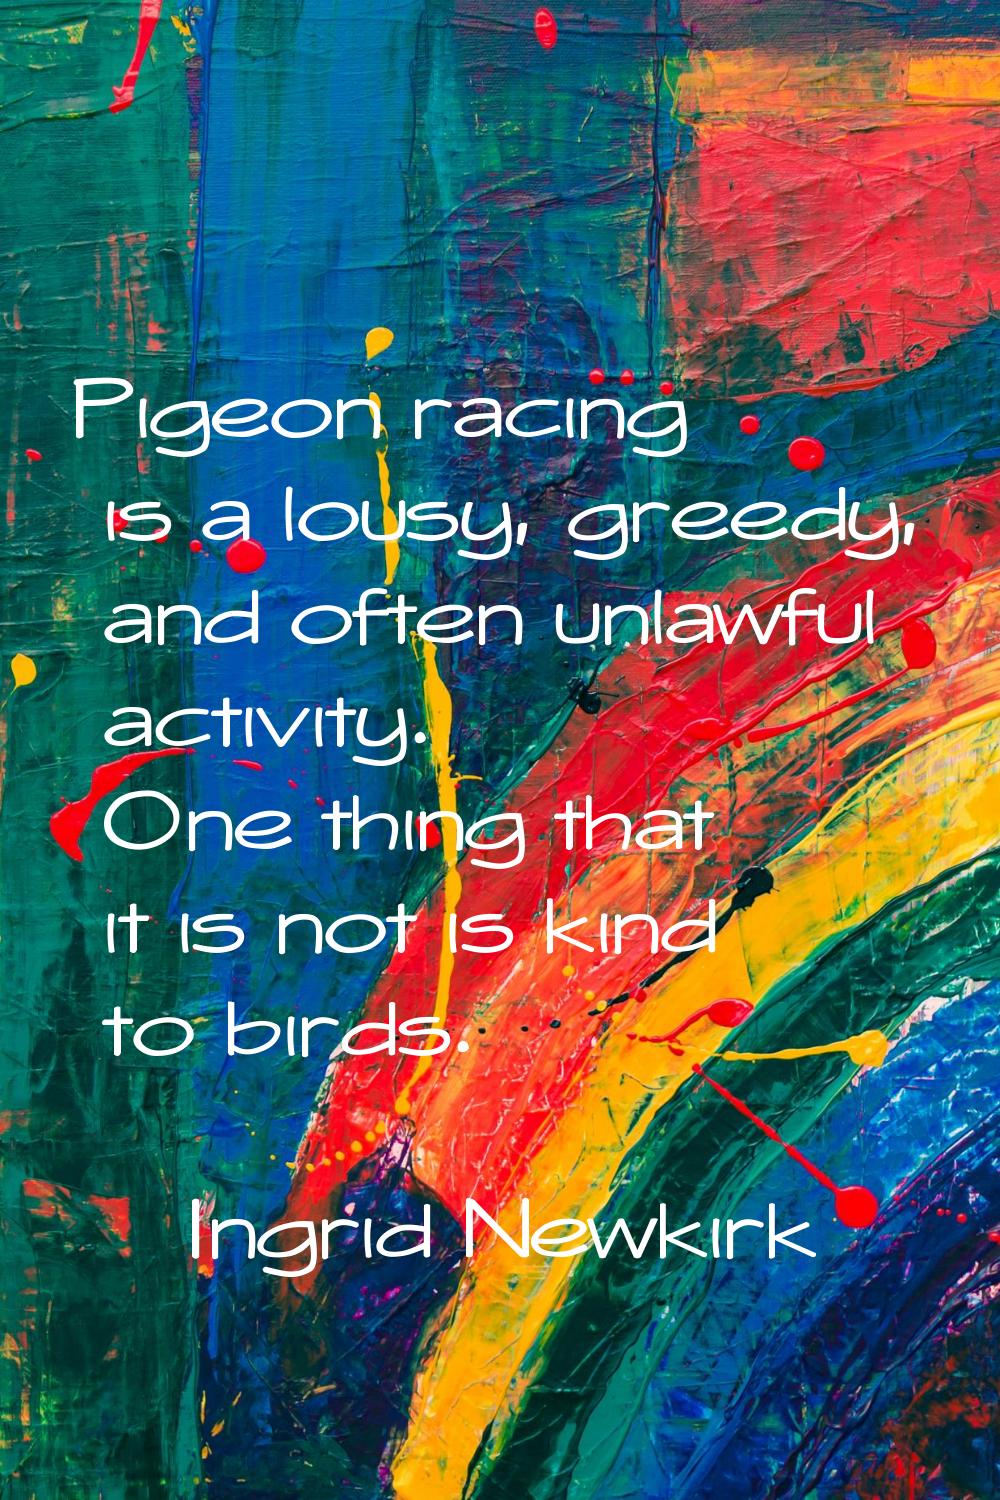 Pigeon racing is a lousy, greedy, and often unlawful activity. One thing that it is not is kind to 